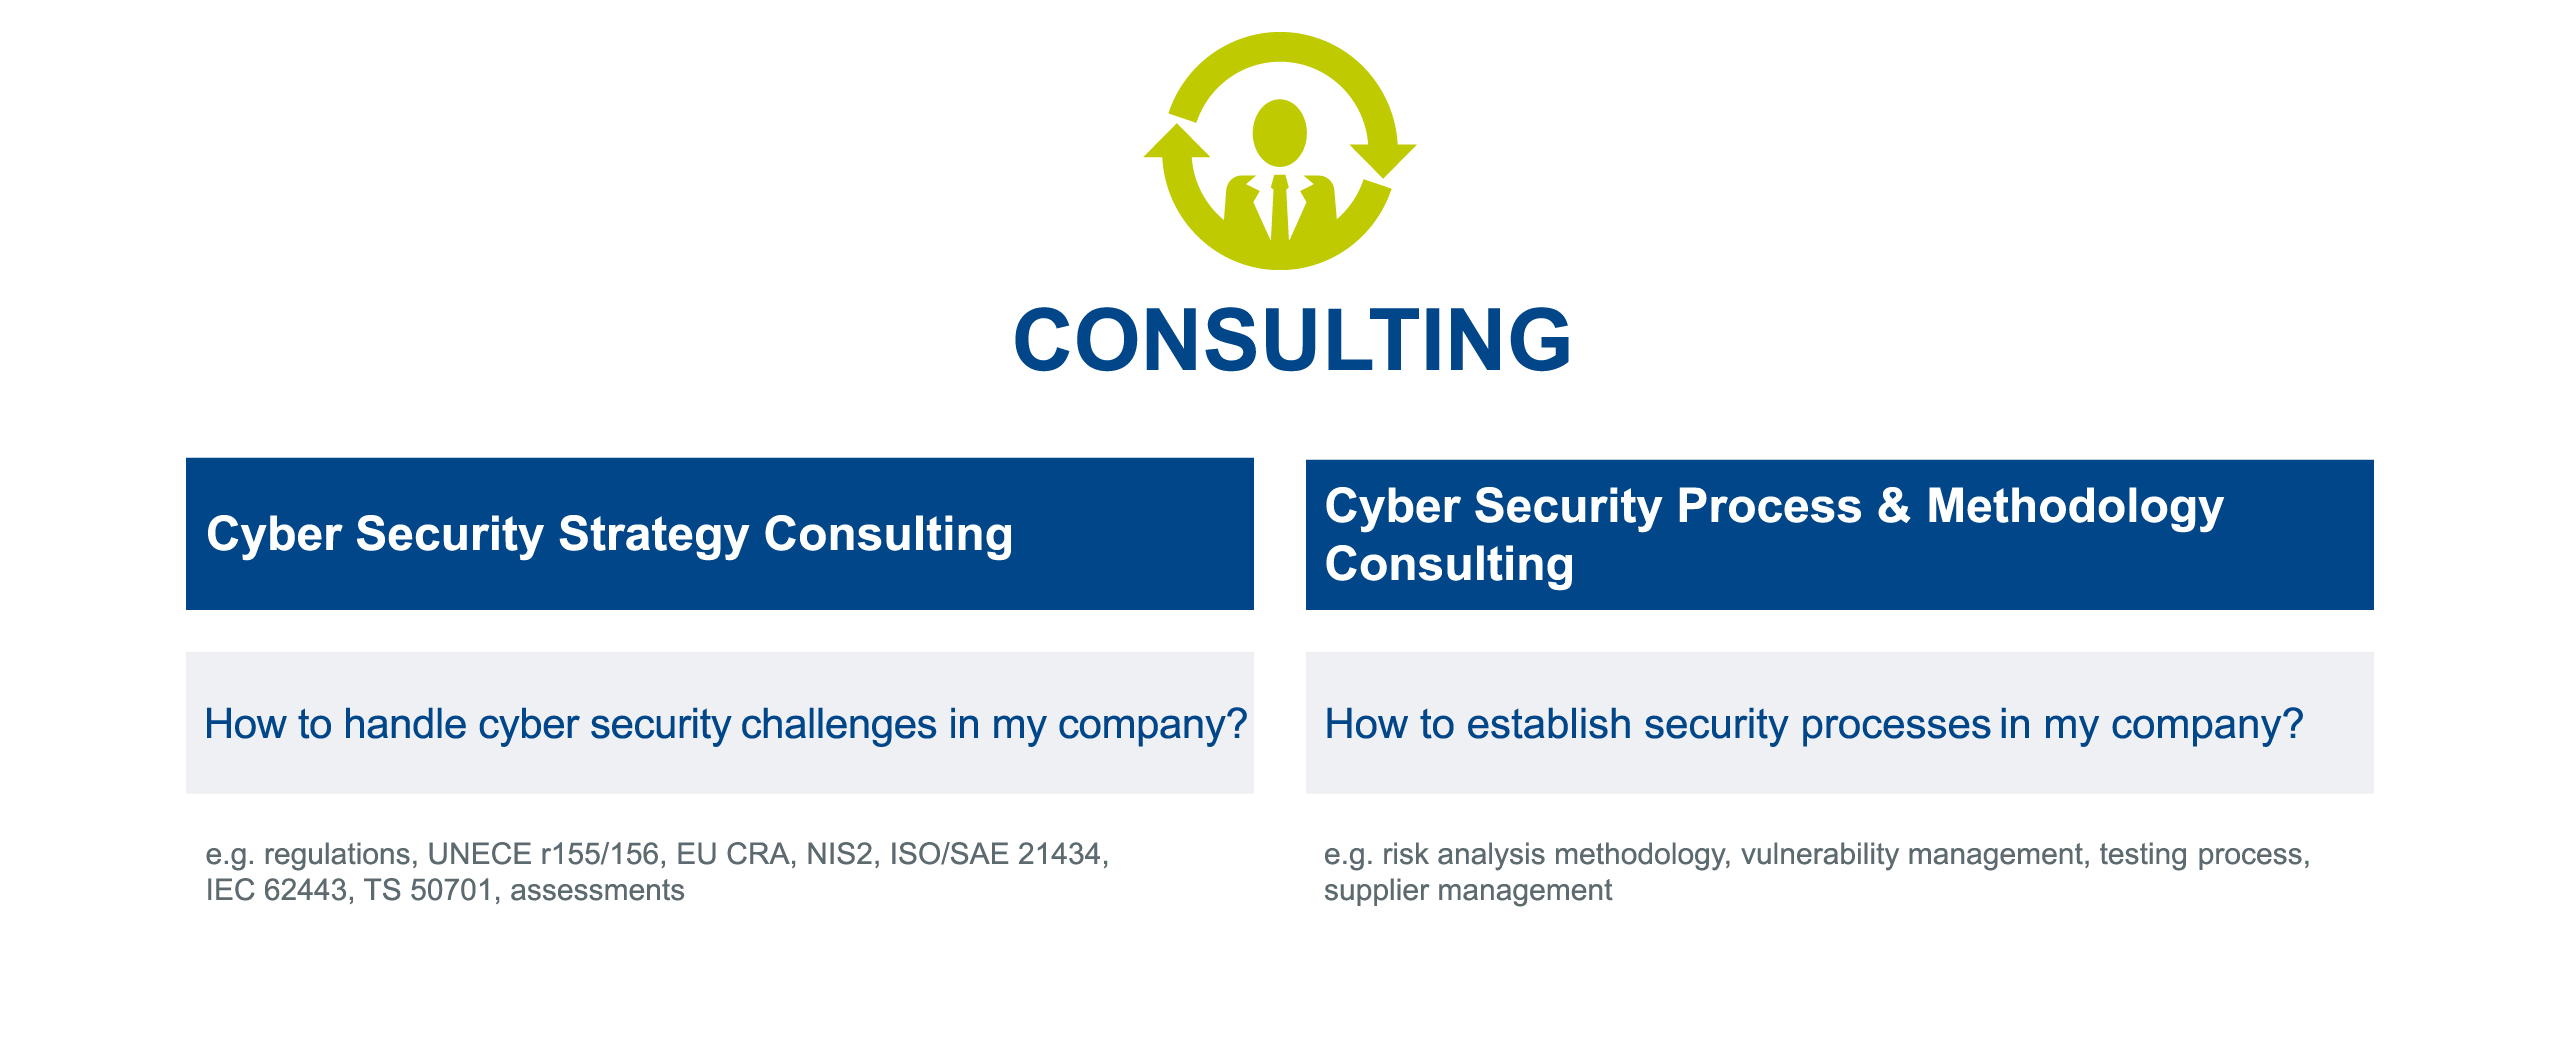 Infographic showing ITK Engineering's consulting services in cyber security: from strategy consulting to process & methodology consulting.